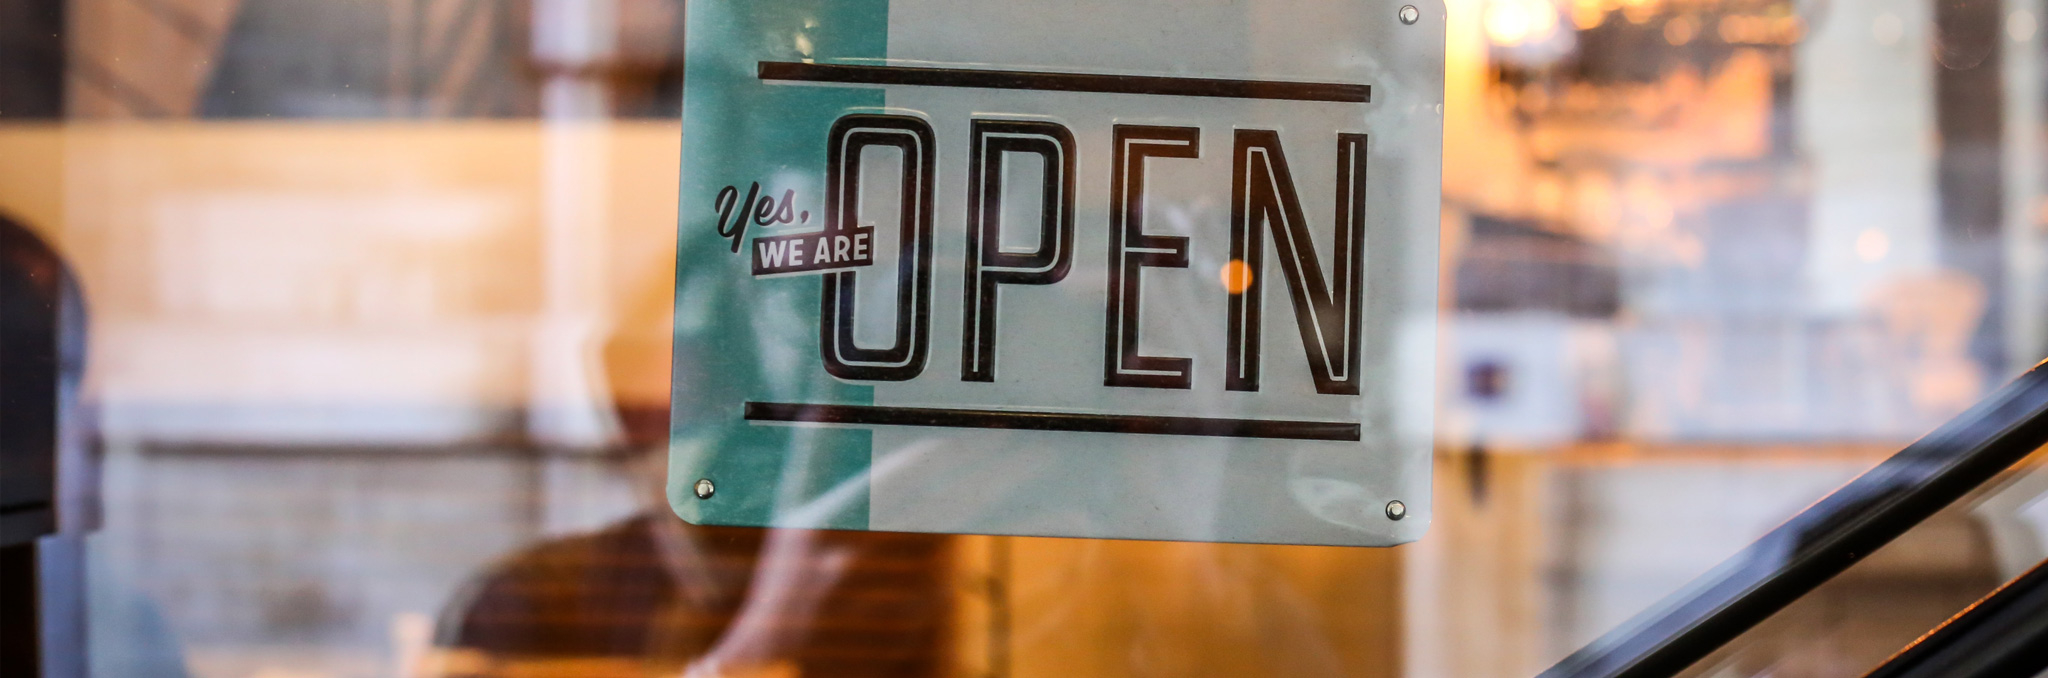 Yes we are Open sign. Photo by Alexandre Godreau on Unsplash